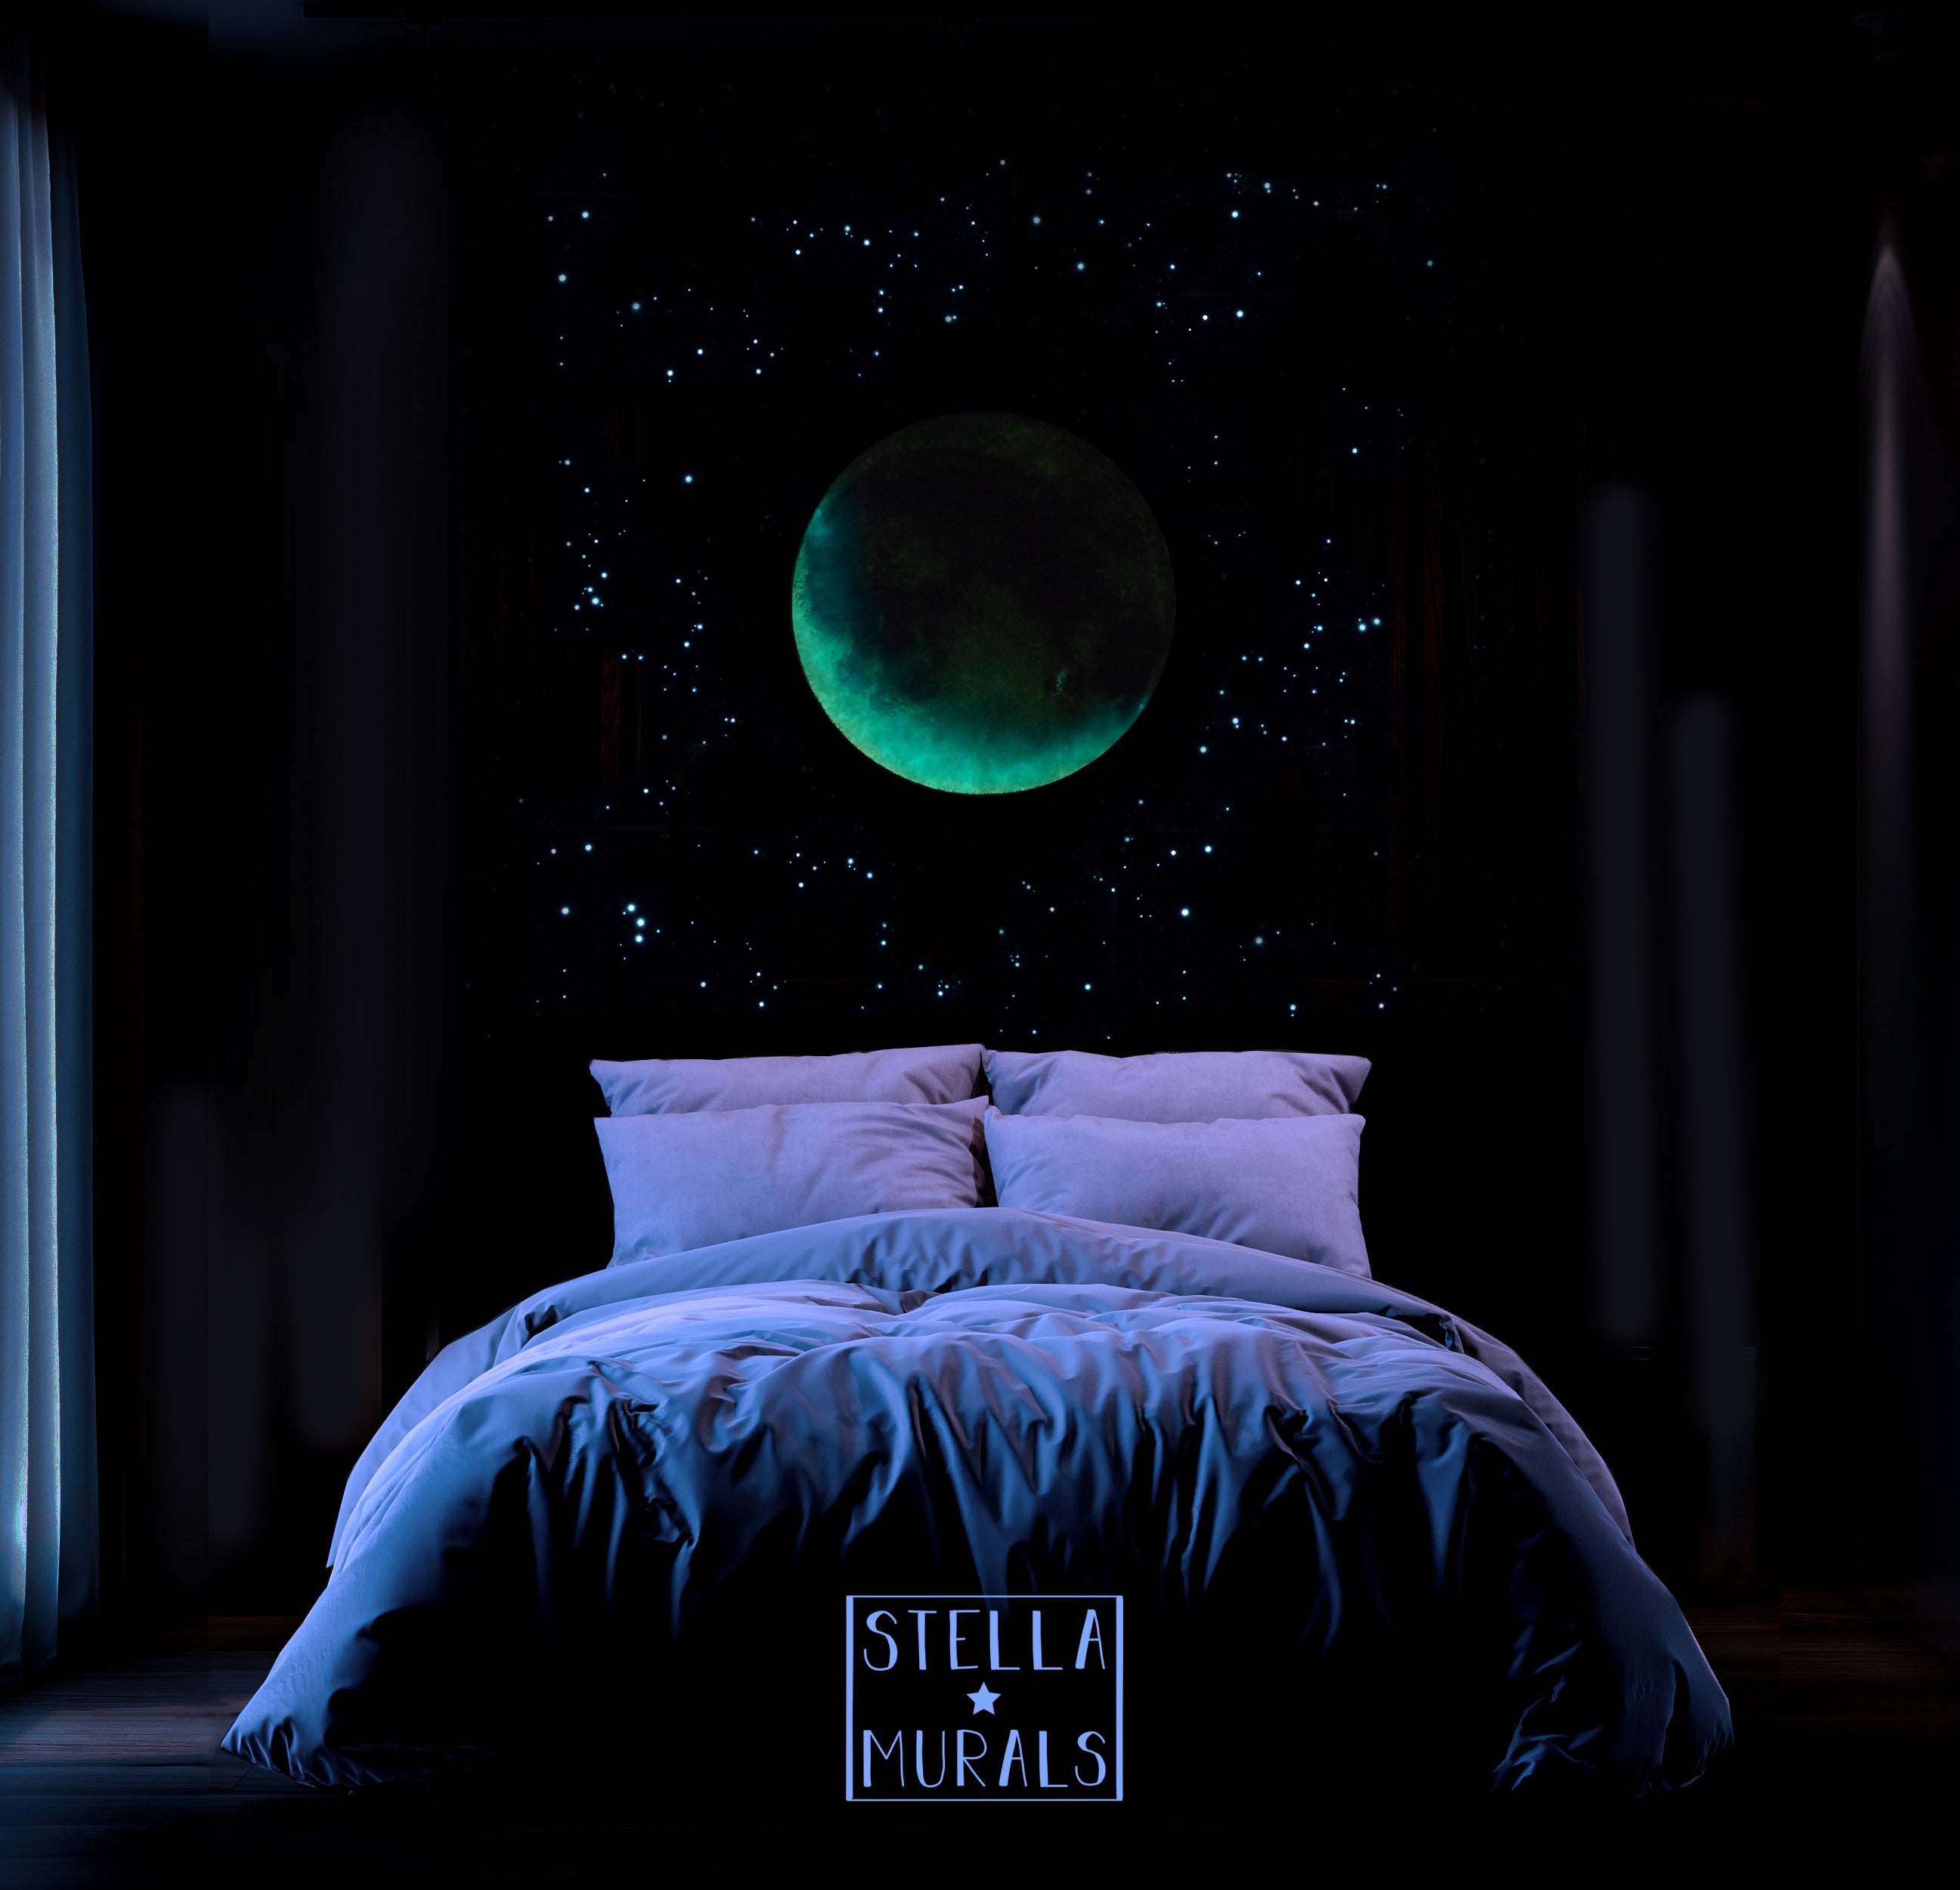 xl glow in the dark waning moon to crescent moon, phases of the moon. Unique home decor for bedrooms